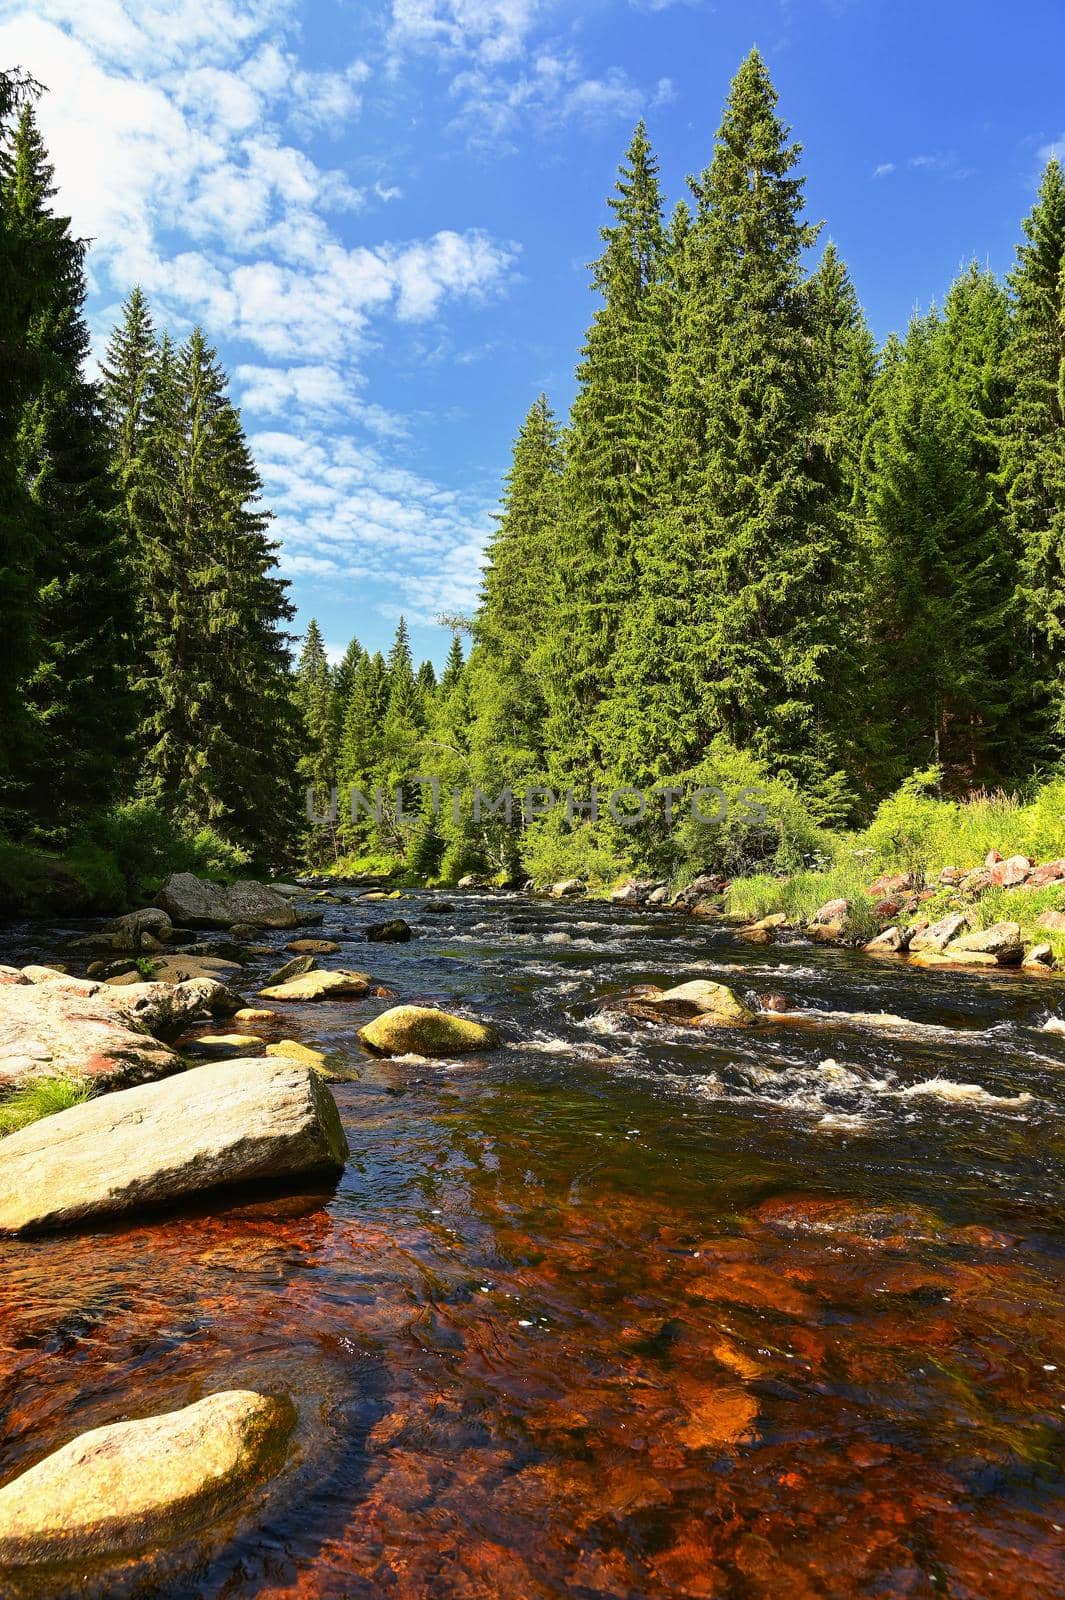 Beautiful river with stones and trees in the mountains with forest. Nature - landscape. Background with blue sky and sun - Vydra river in Sumava, Czech Republic.